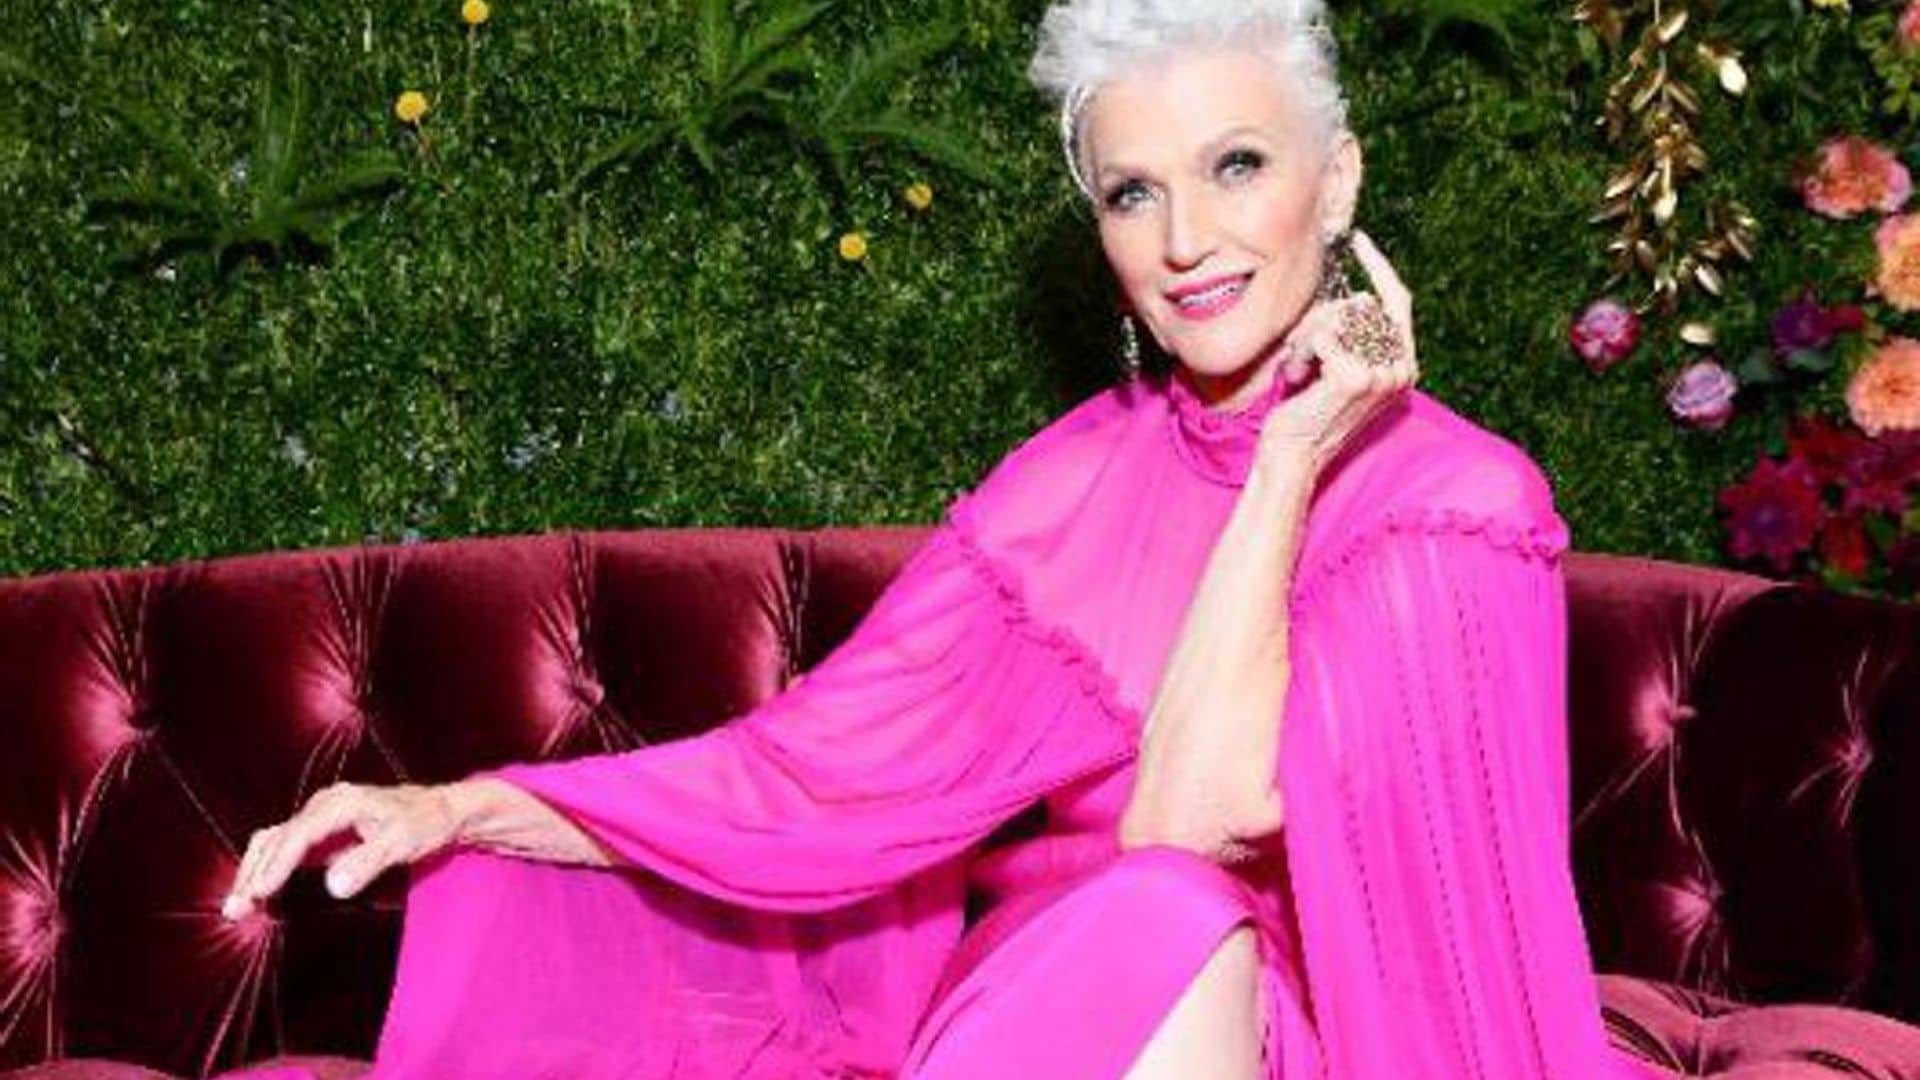 Maye Musk claims that she's never had the body of a supermodel